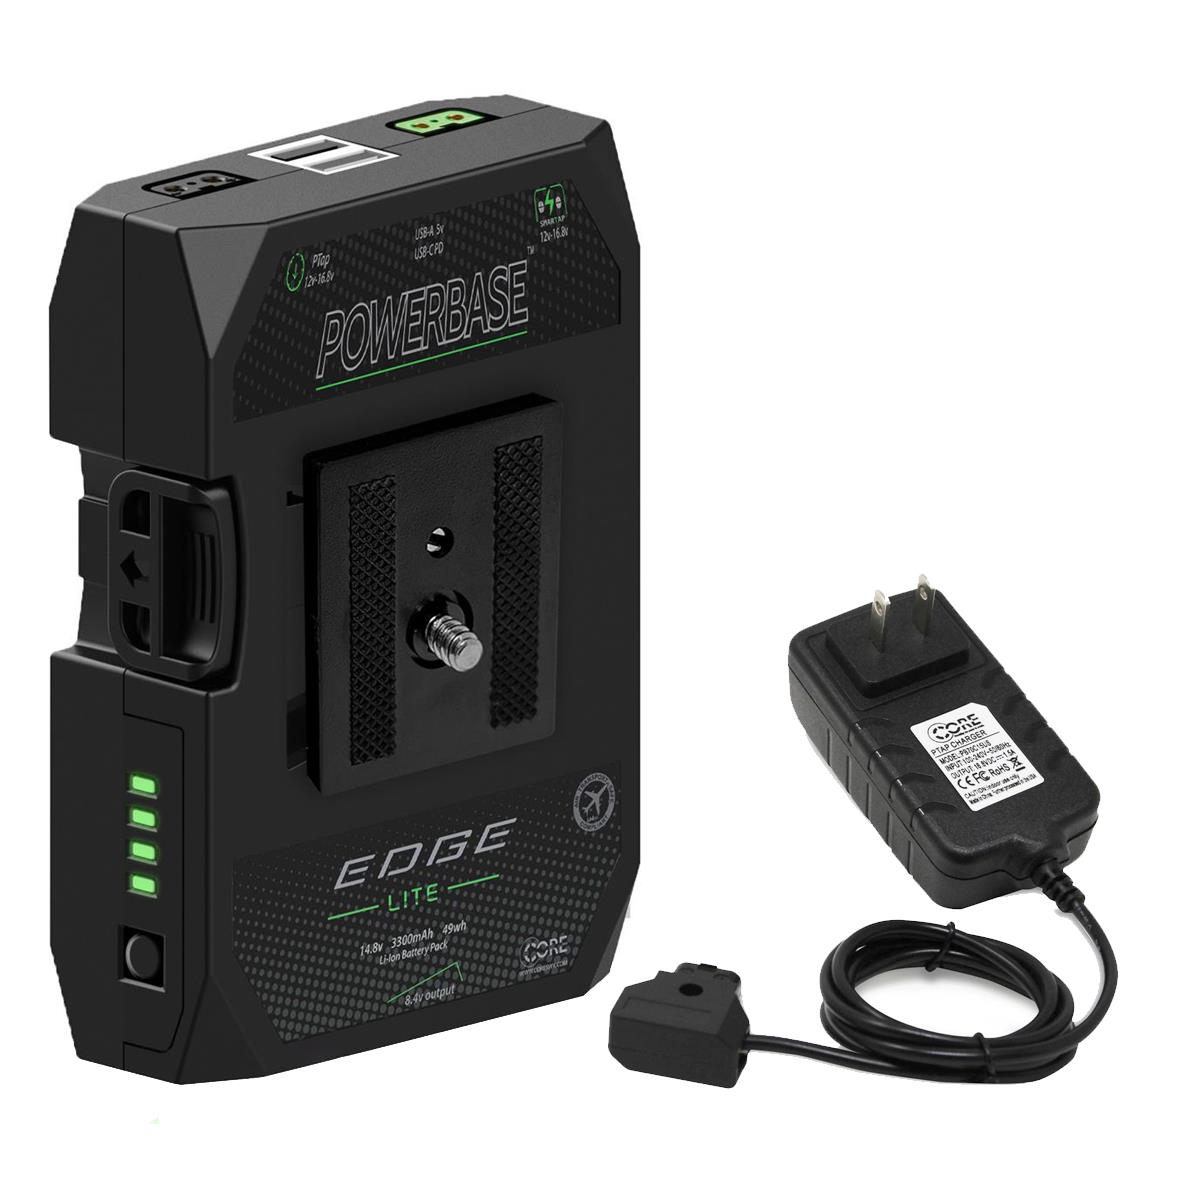 Core SWX PowerBase Edge Lite 49Wh Battery Pack with D-Tap Charger -  PBE-LITE A